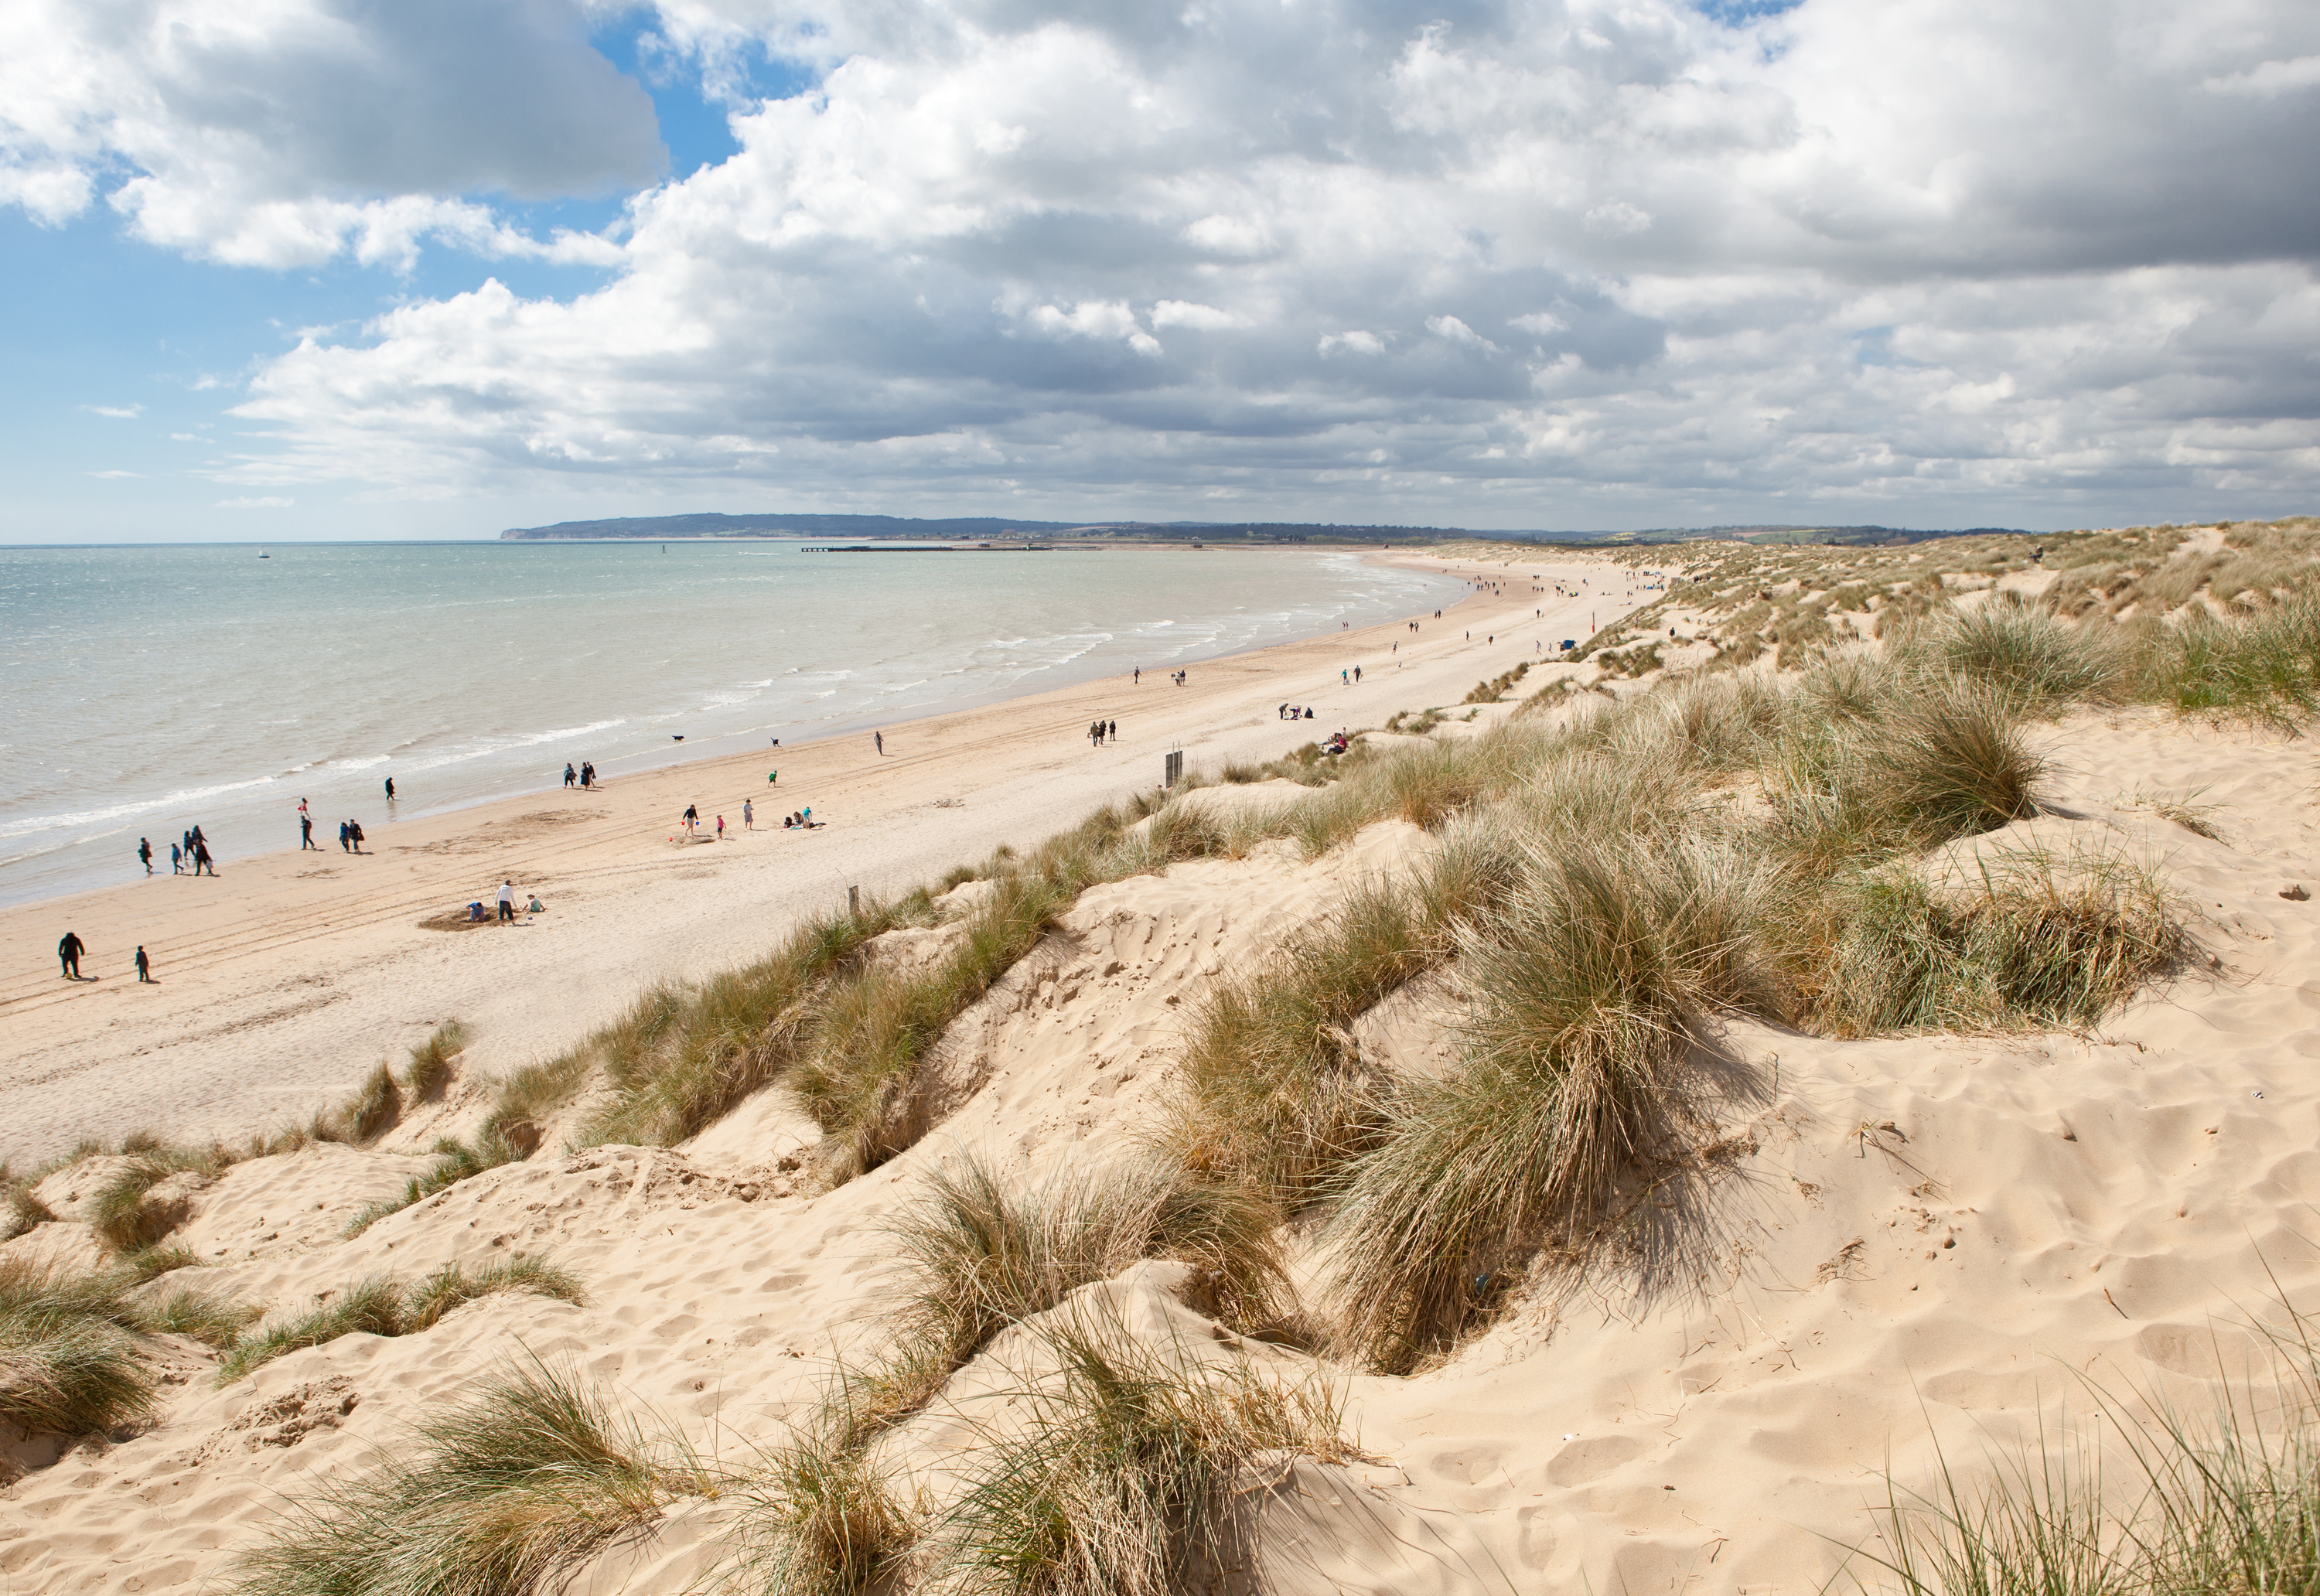 10 best beaches near London to visit this weekend | VIDEO